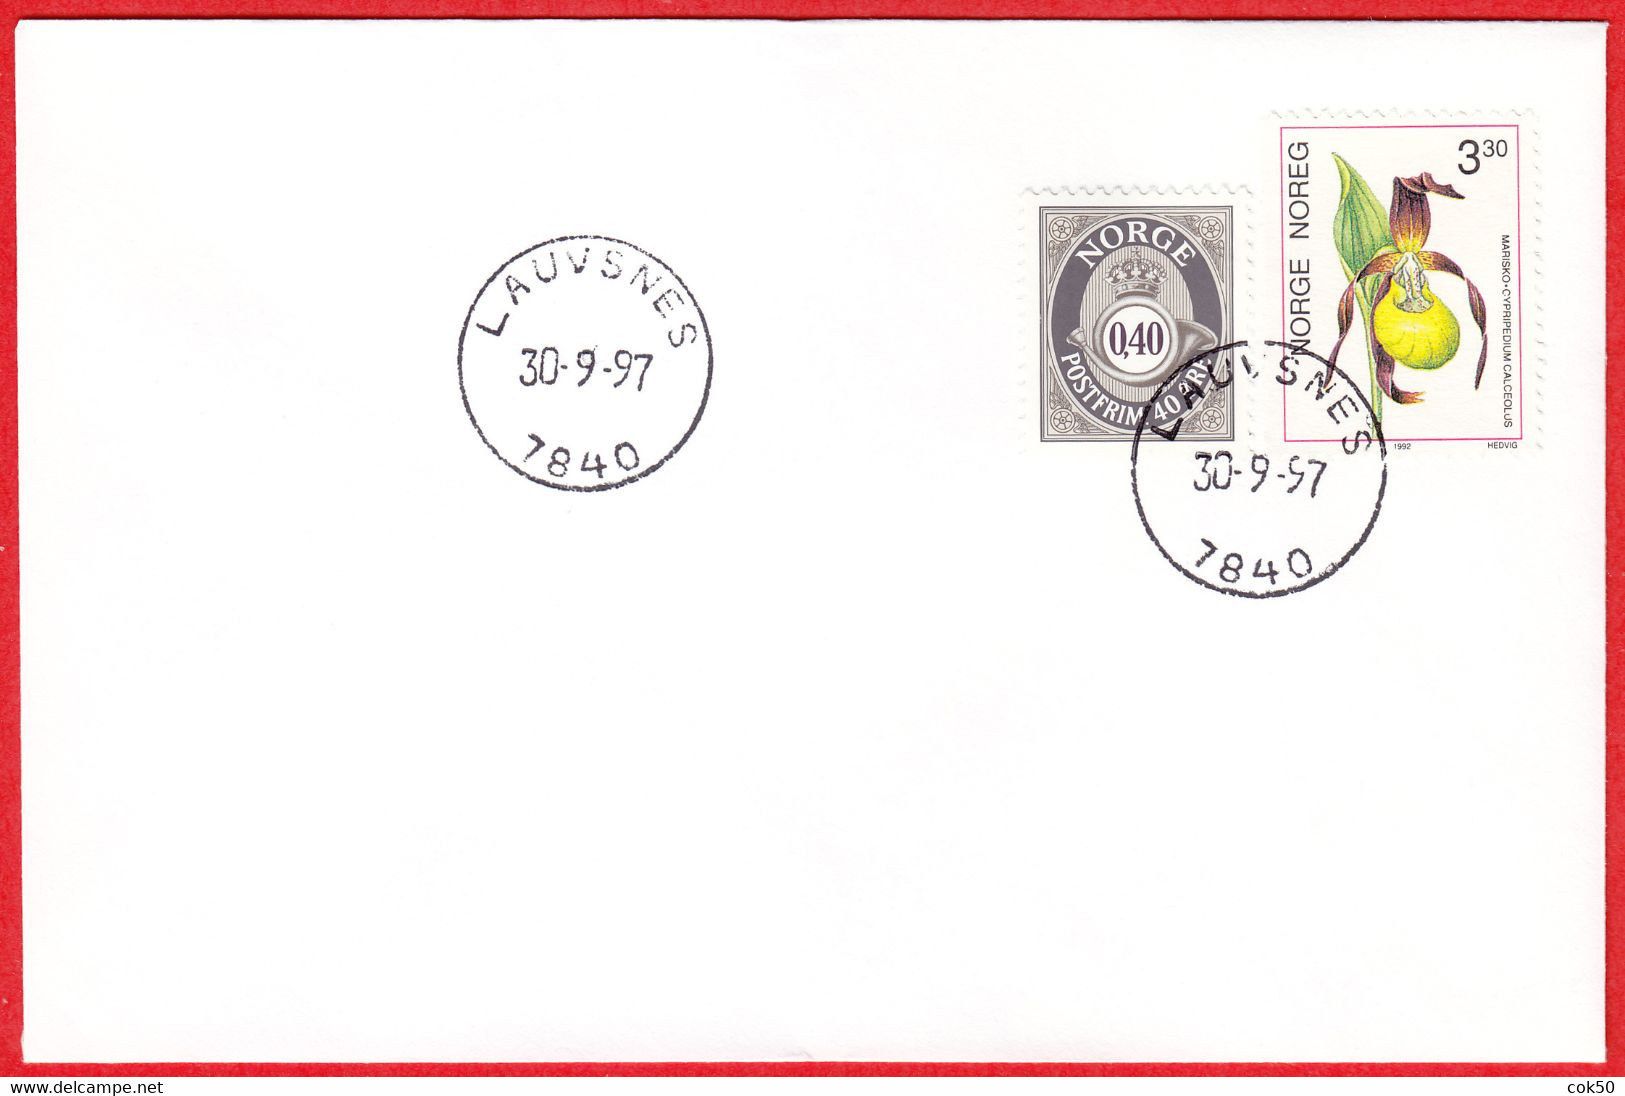 NORWAY -  7840 LAUVSNES (Trøndelag County) - Last Day/postoffice Closed On 1997.09.30 - Local Post Stamps